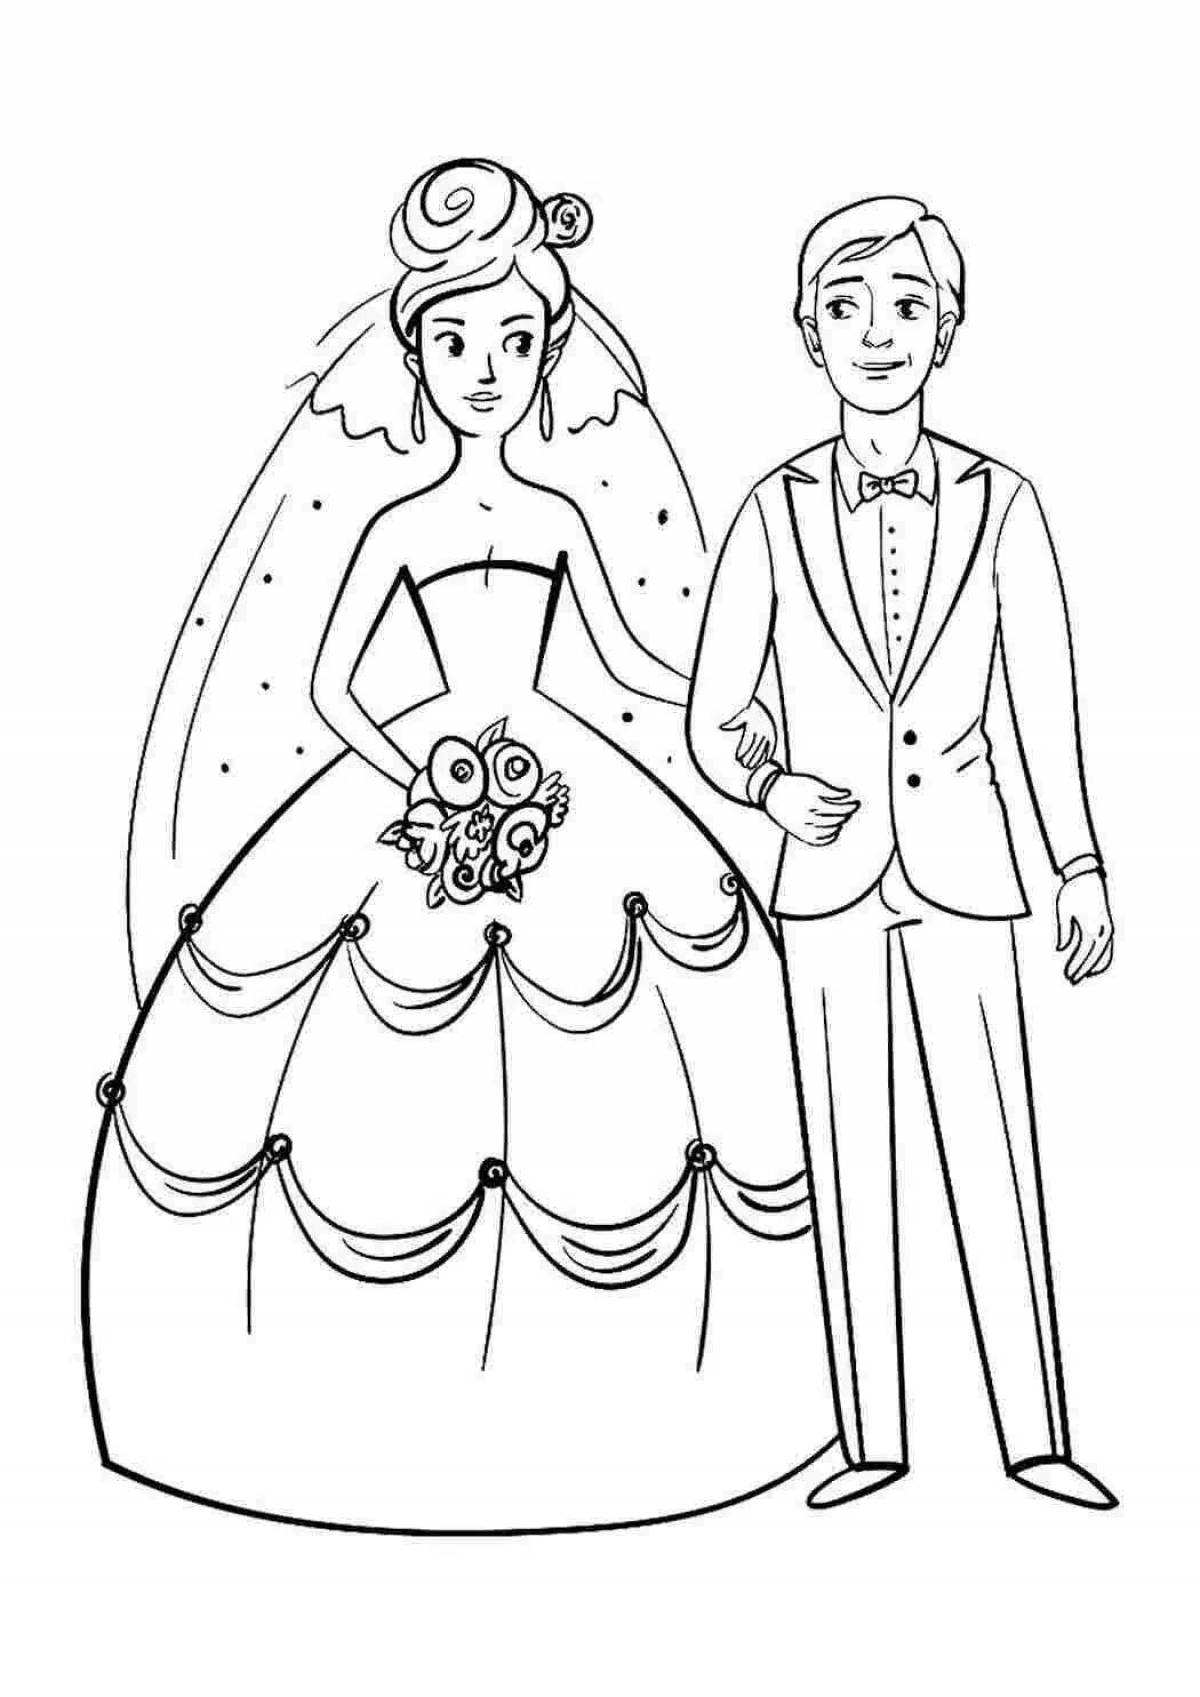 Glowing Bride and Groom Coloring Page